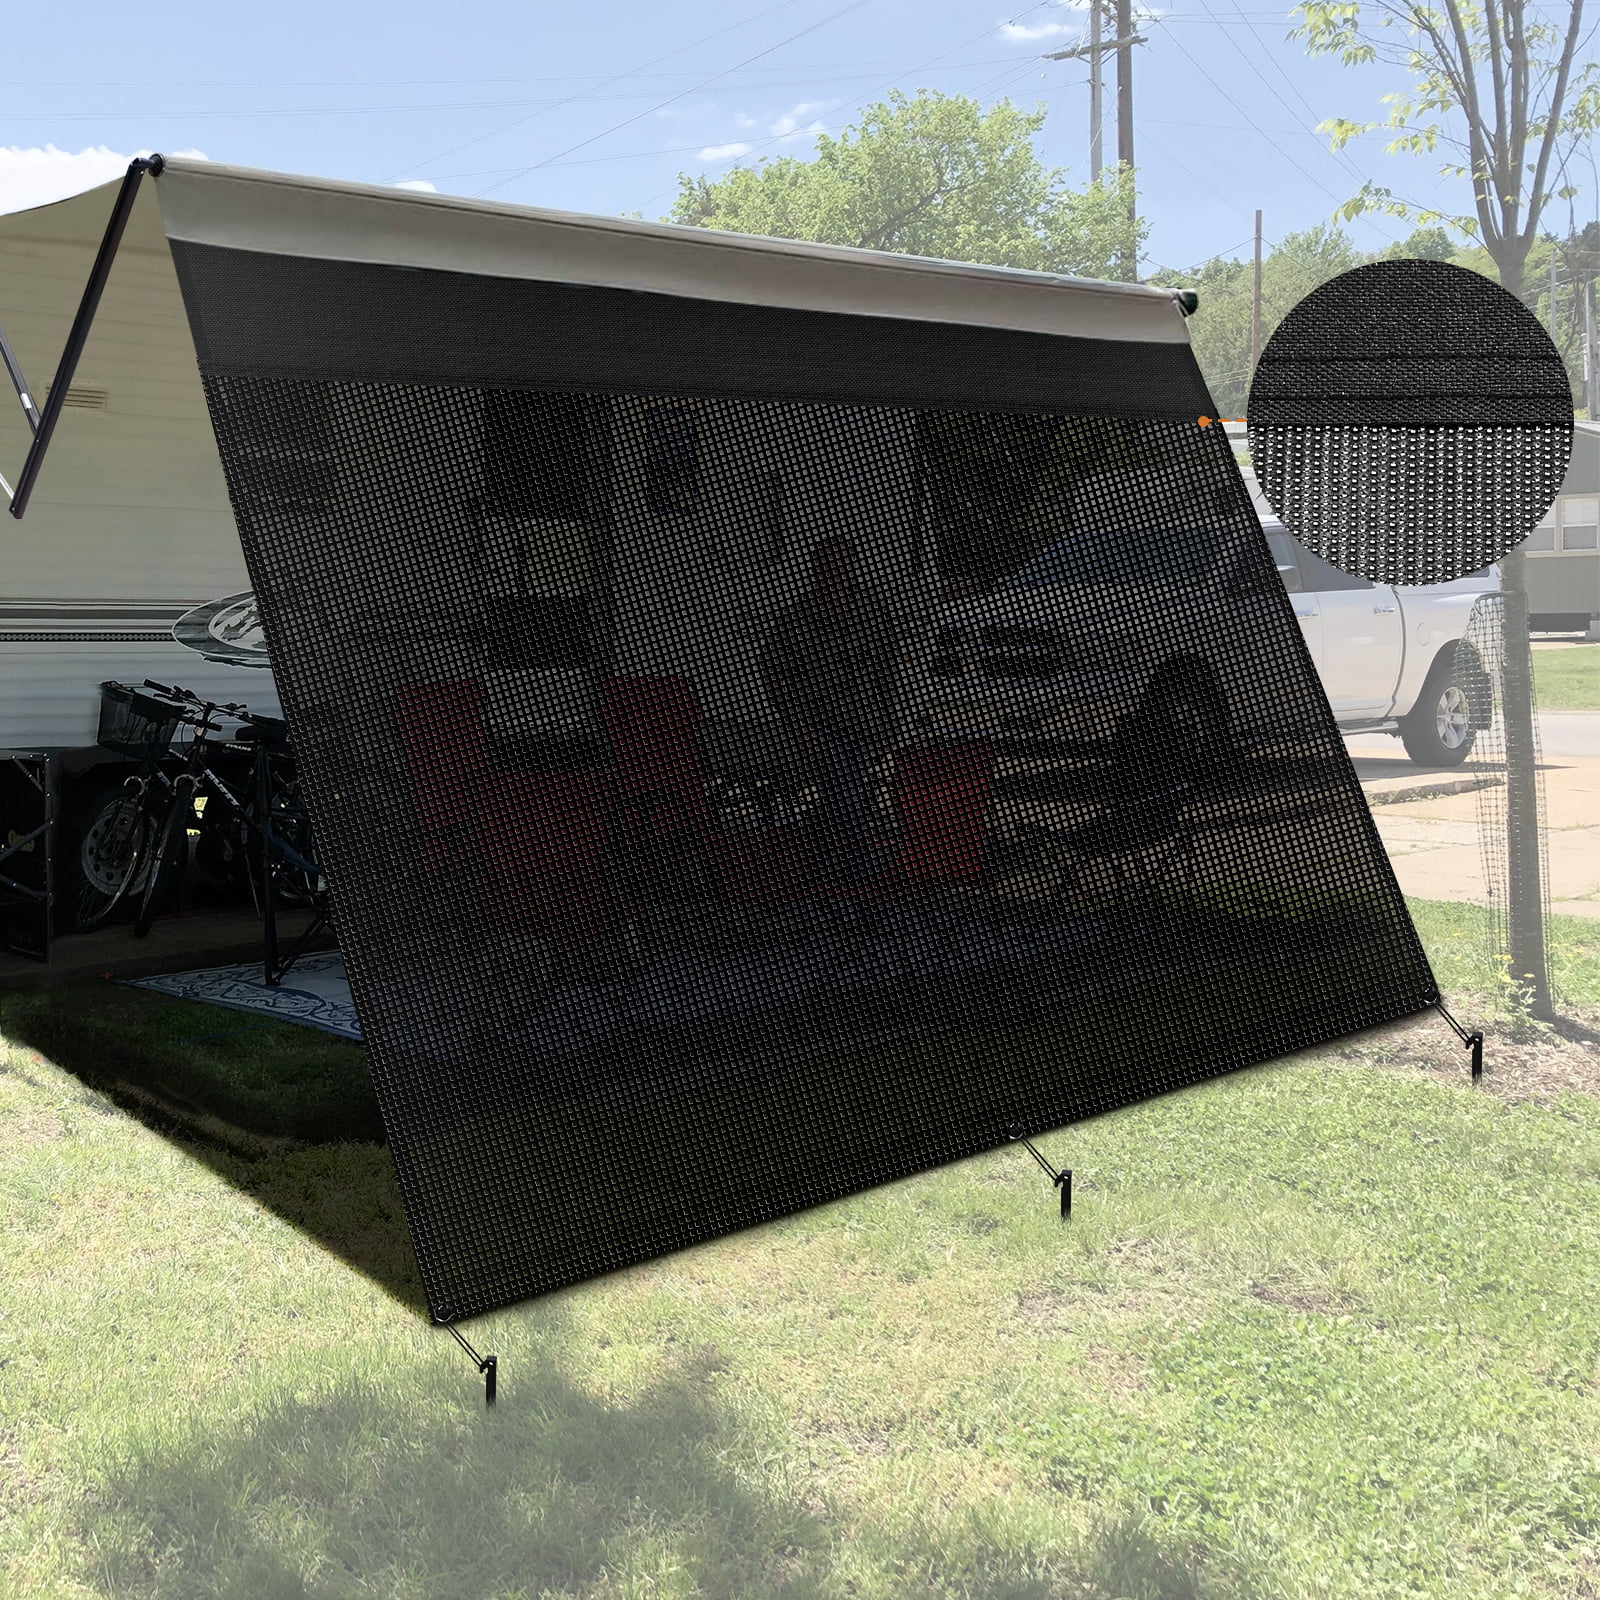 Fonzier Splicing RV Awning Sun Shade Screen for Side Panel 7' x 9' 600D Oxford Top & 230GSM Bottom Black Mesh Sunshade for Motorhome Camper Trailer UV Sunblocker Completed Kits 3 Years Lasting 